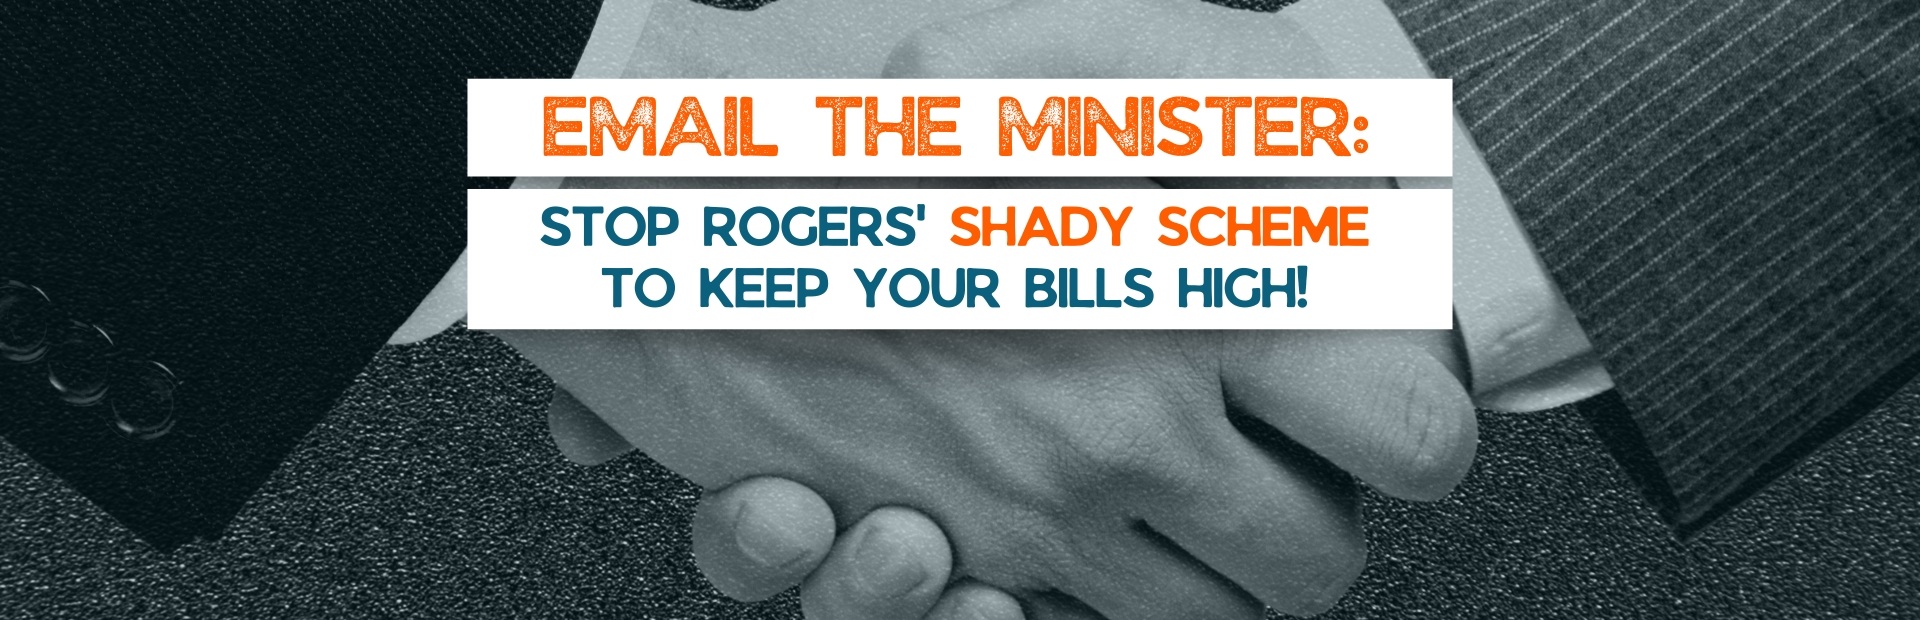 Email the Minister: Stop Rogers’ shady scheme to keep bills high!